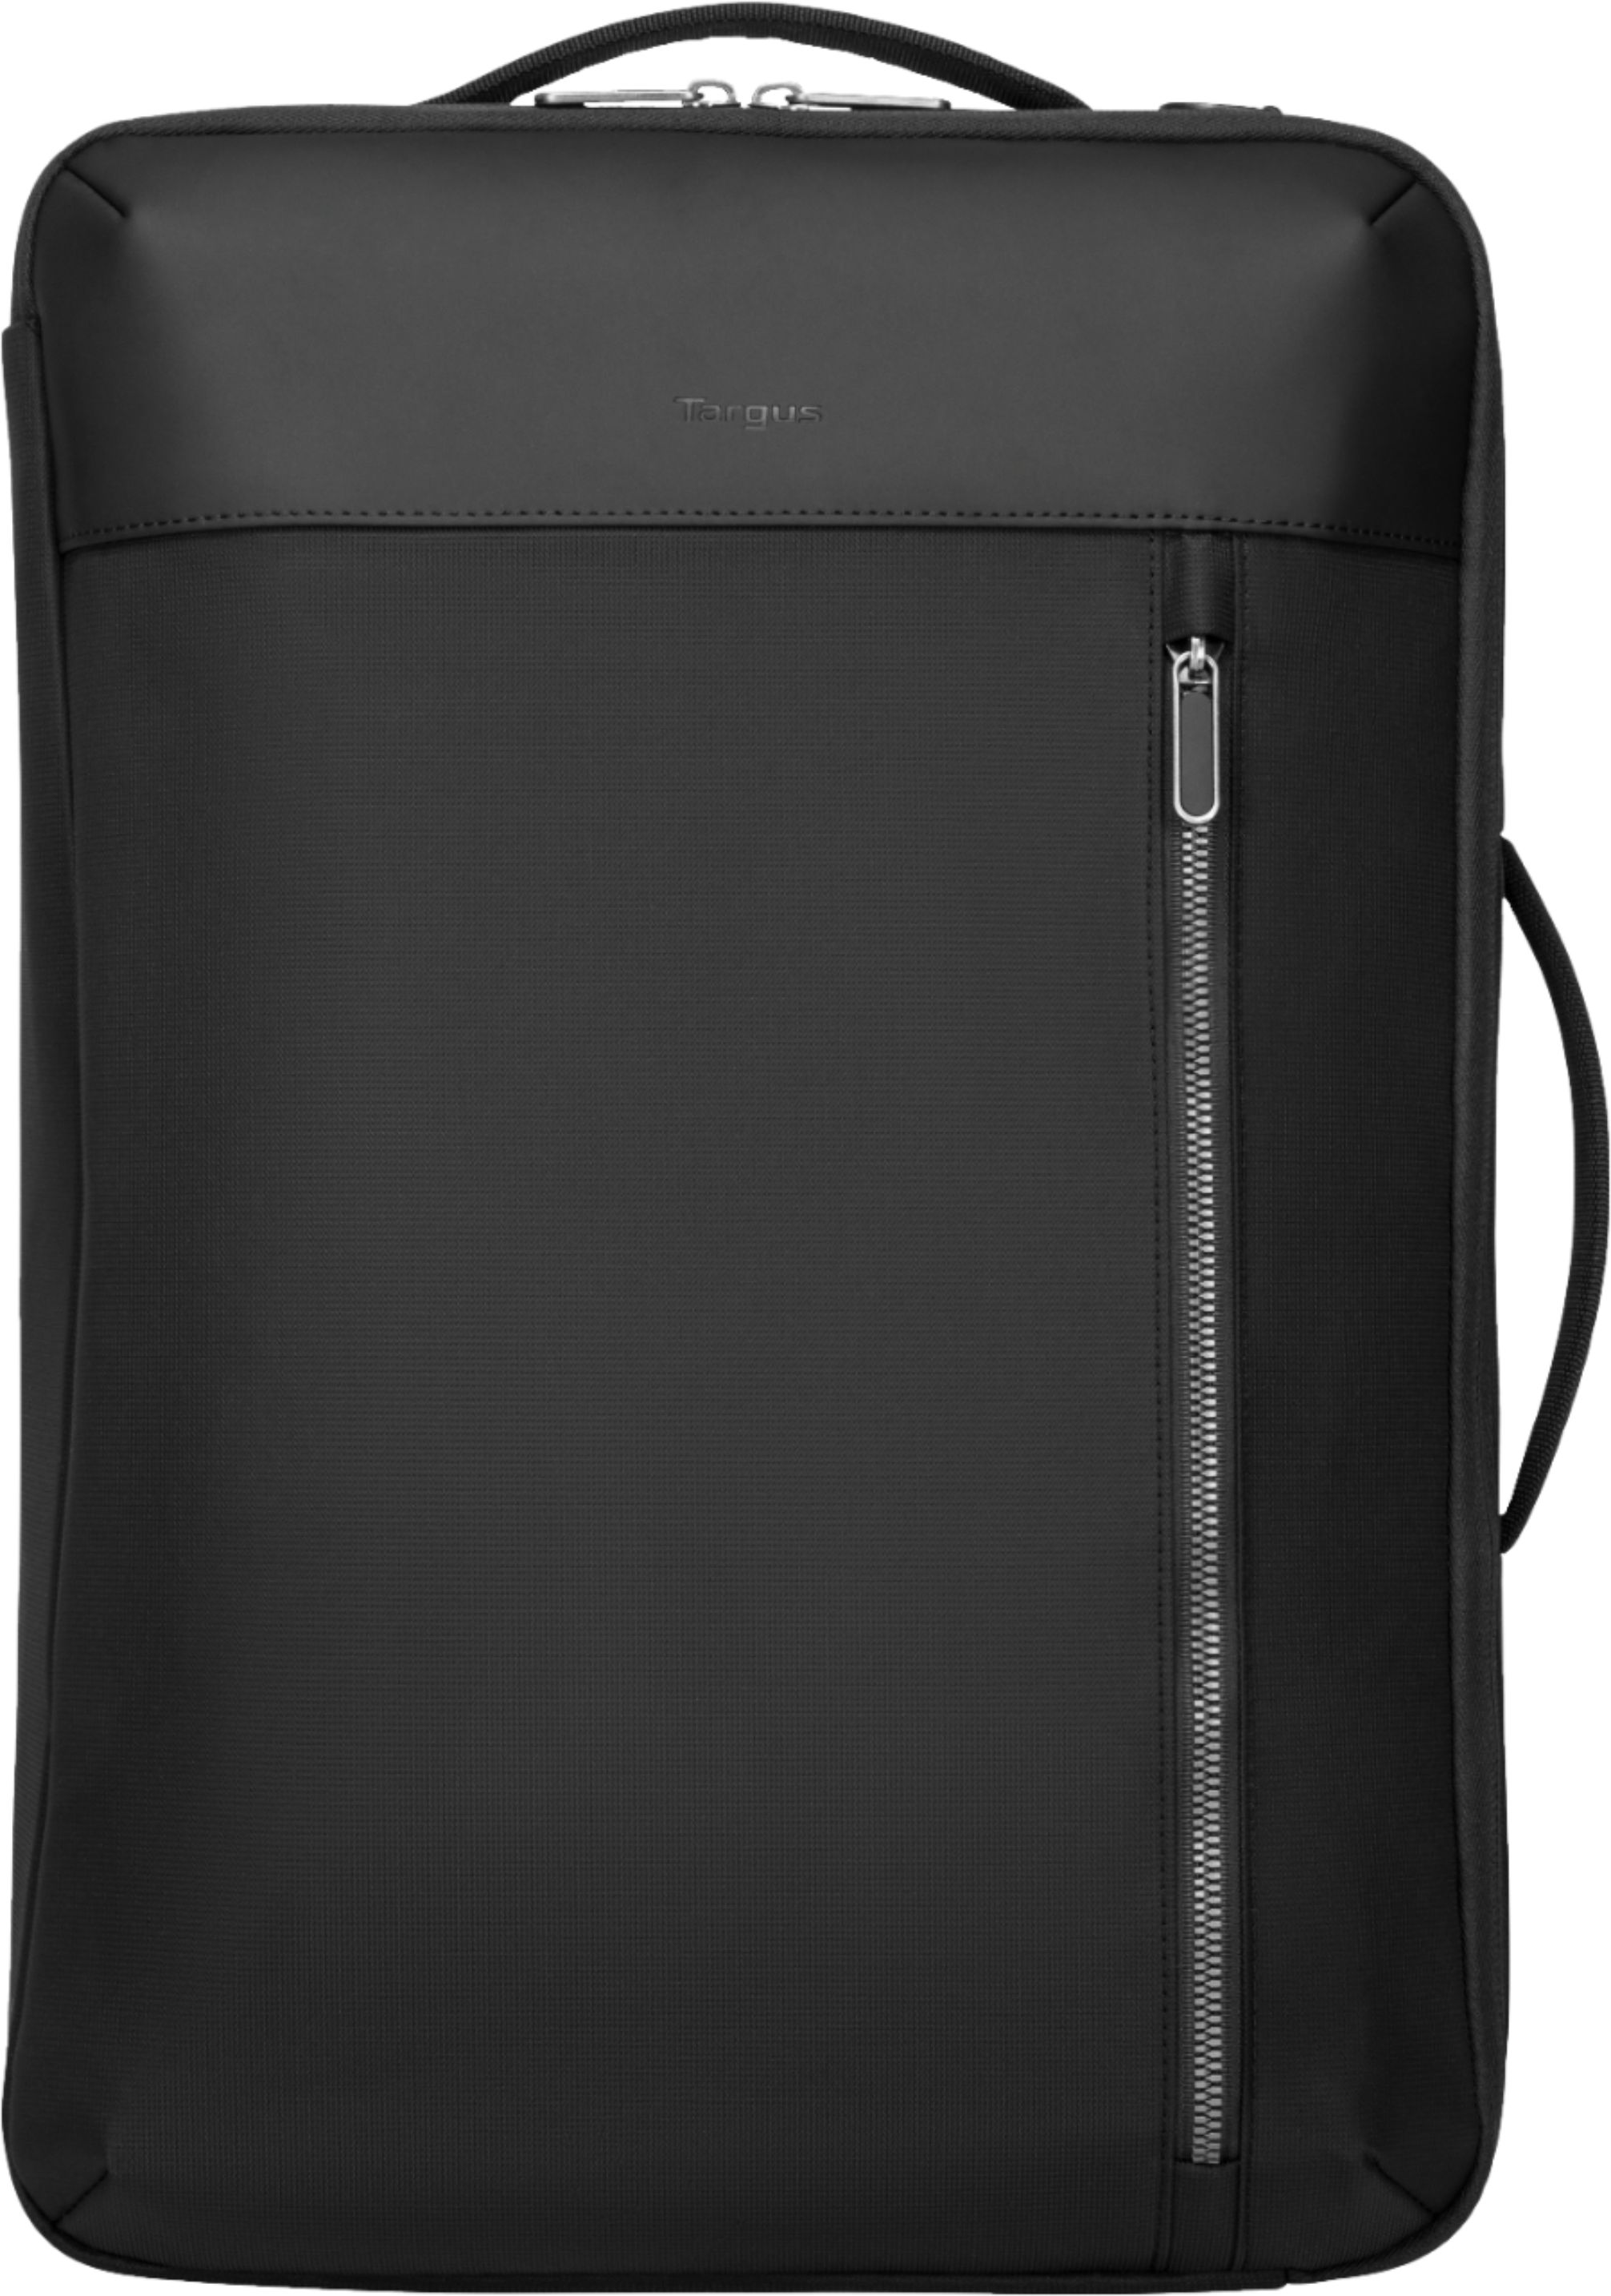 Angle View: Targus - Urban Convertible™ Backpack for 15.6” Laptop - Black